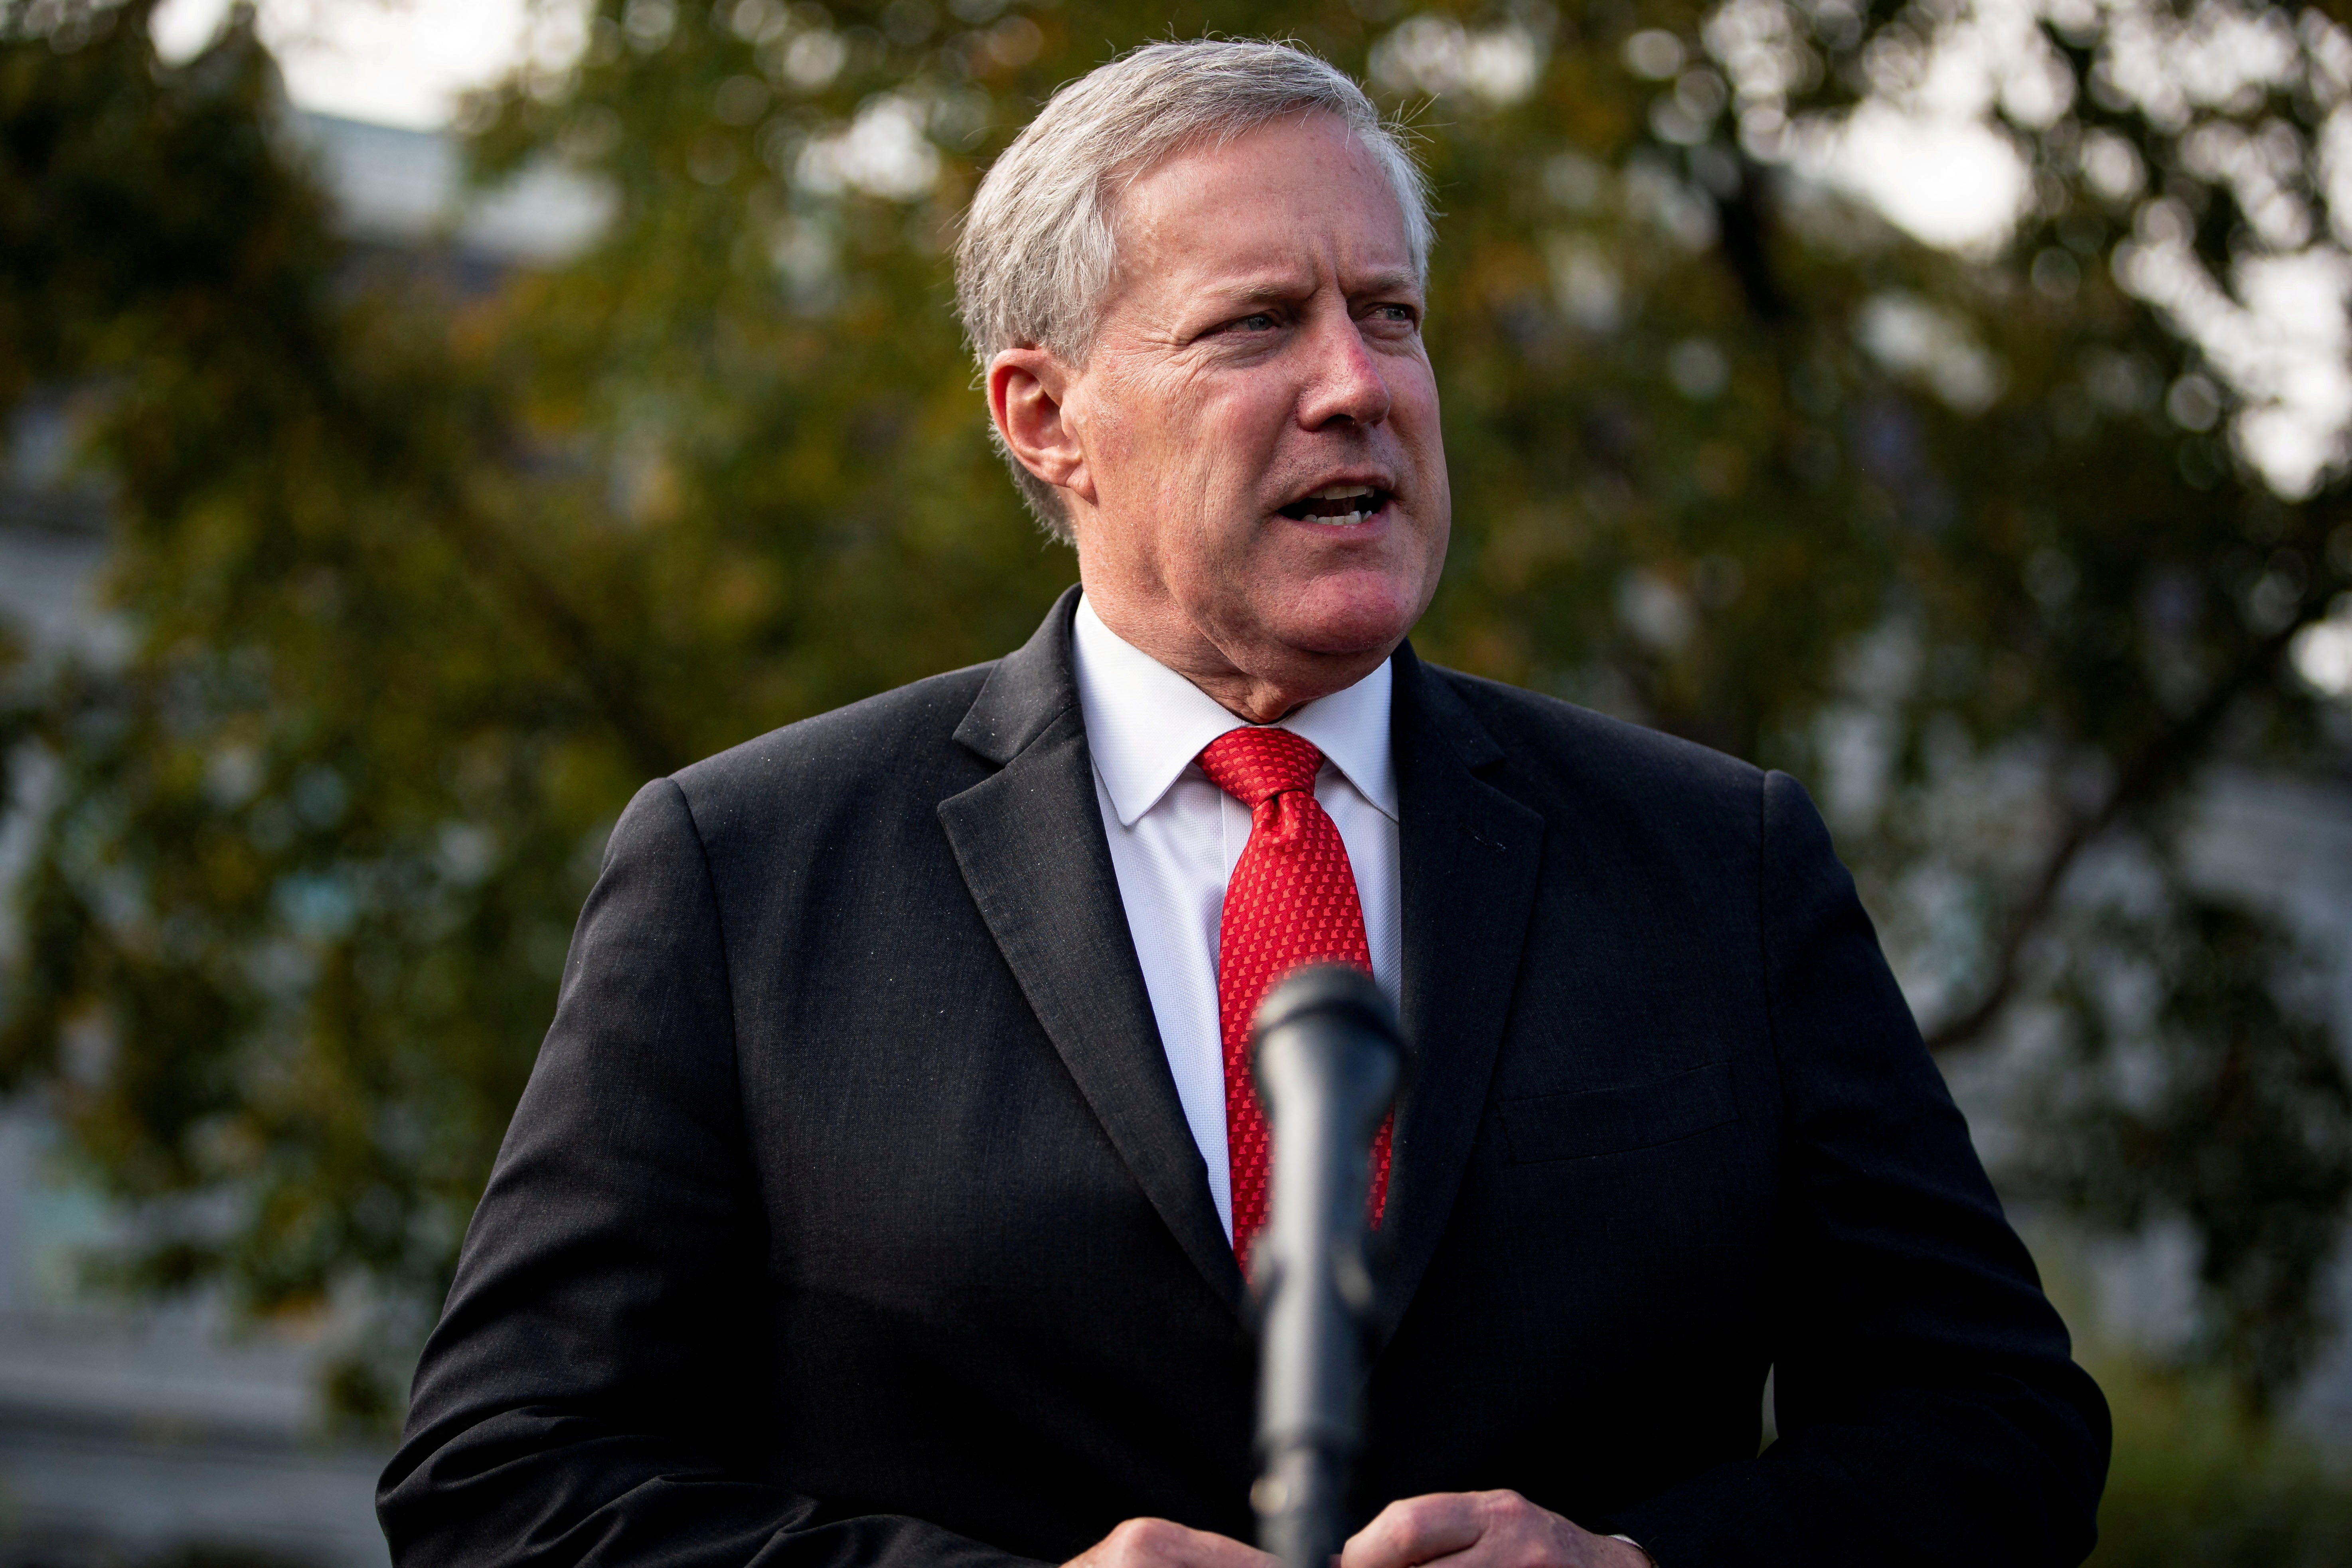 Meadows in a suit speaking at a mic outside the White House